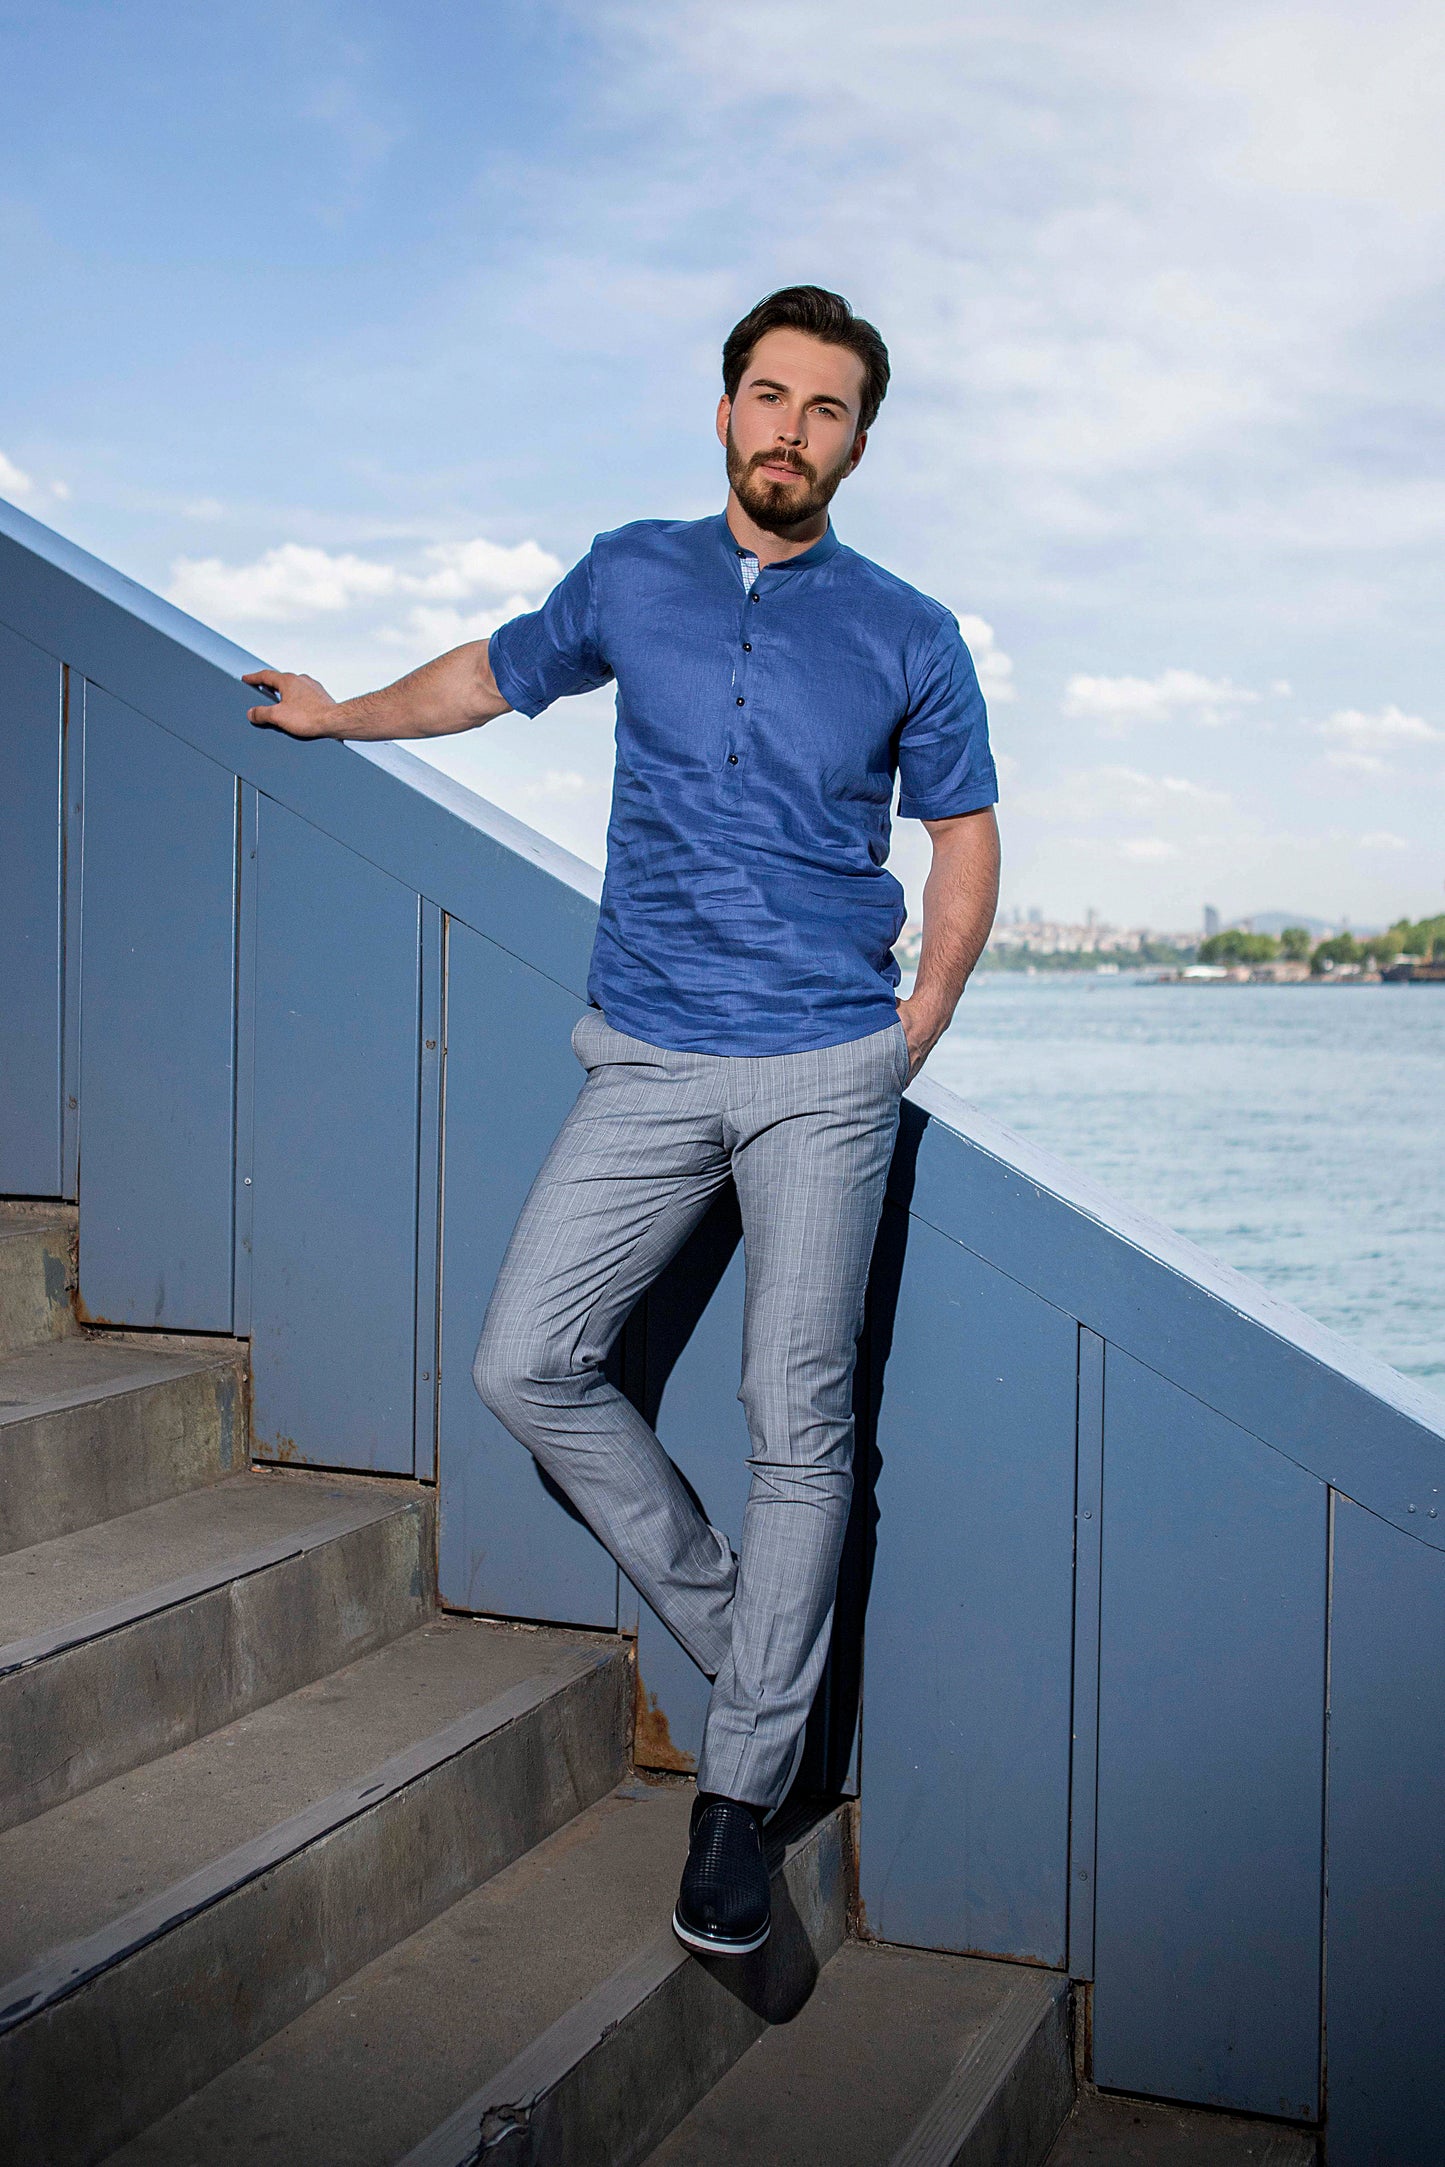 Royal Blue Short-Sleeve Shirt Made with 100% Cool Linen